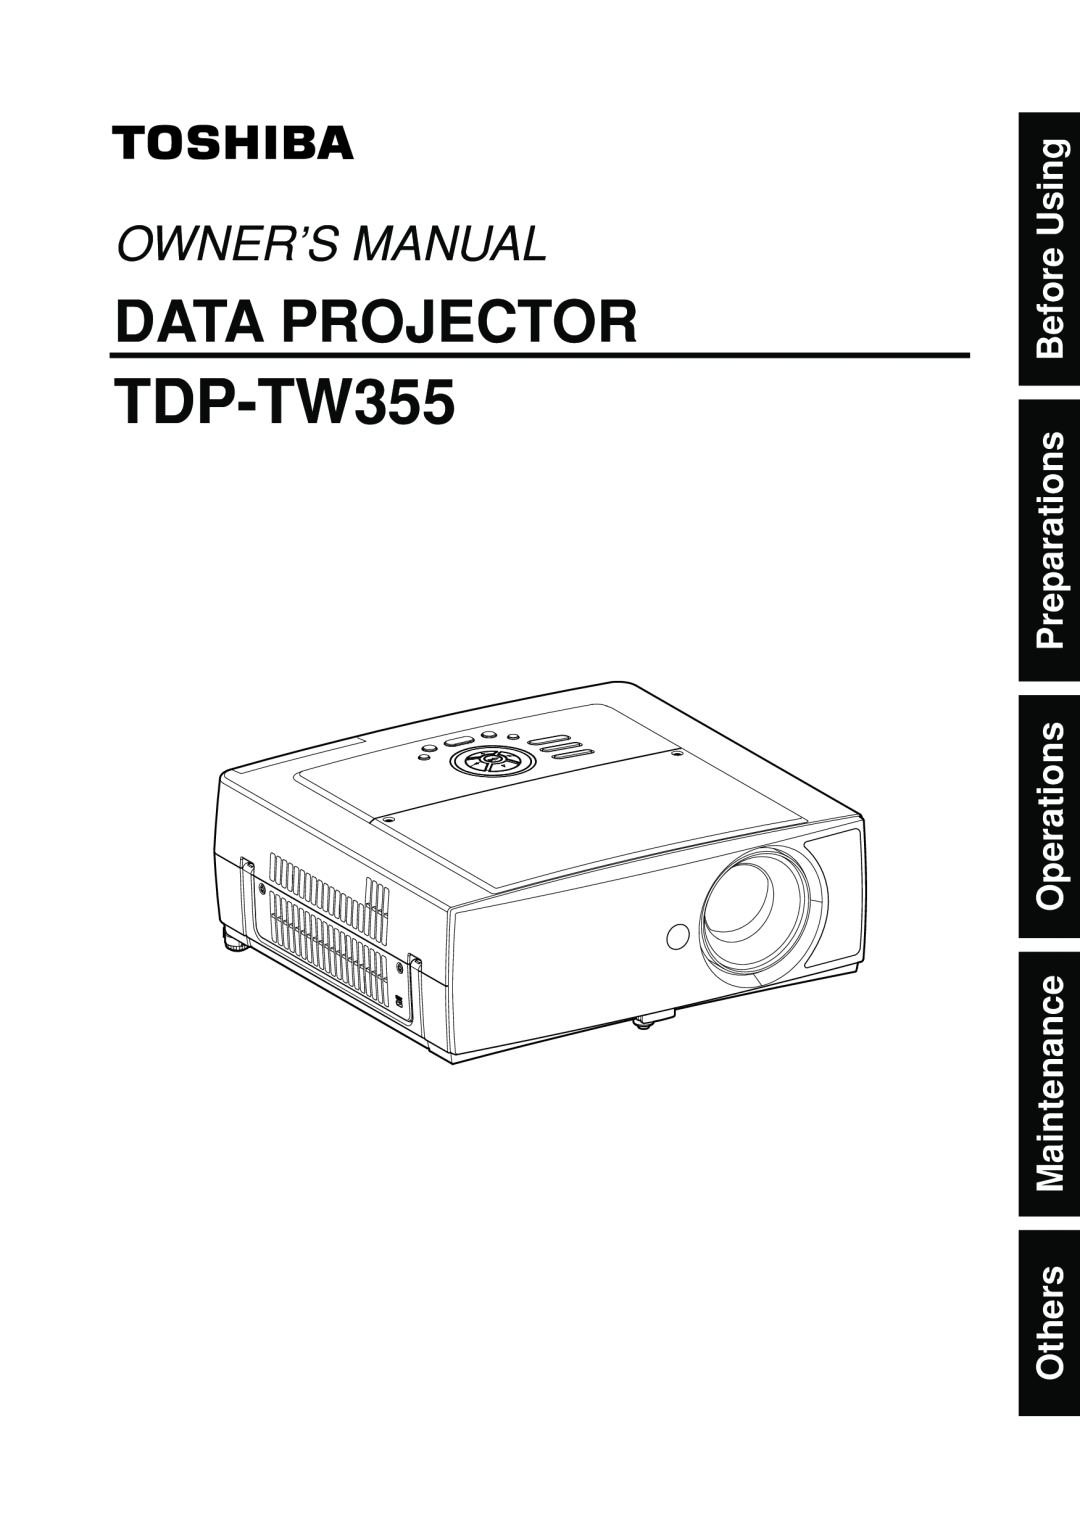 Toshiba TDP-TW355 owner manual Others Maintenance Operations Preparations Before Using, Data Projector, Owner’S Manual 